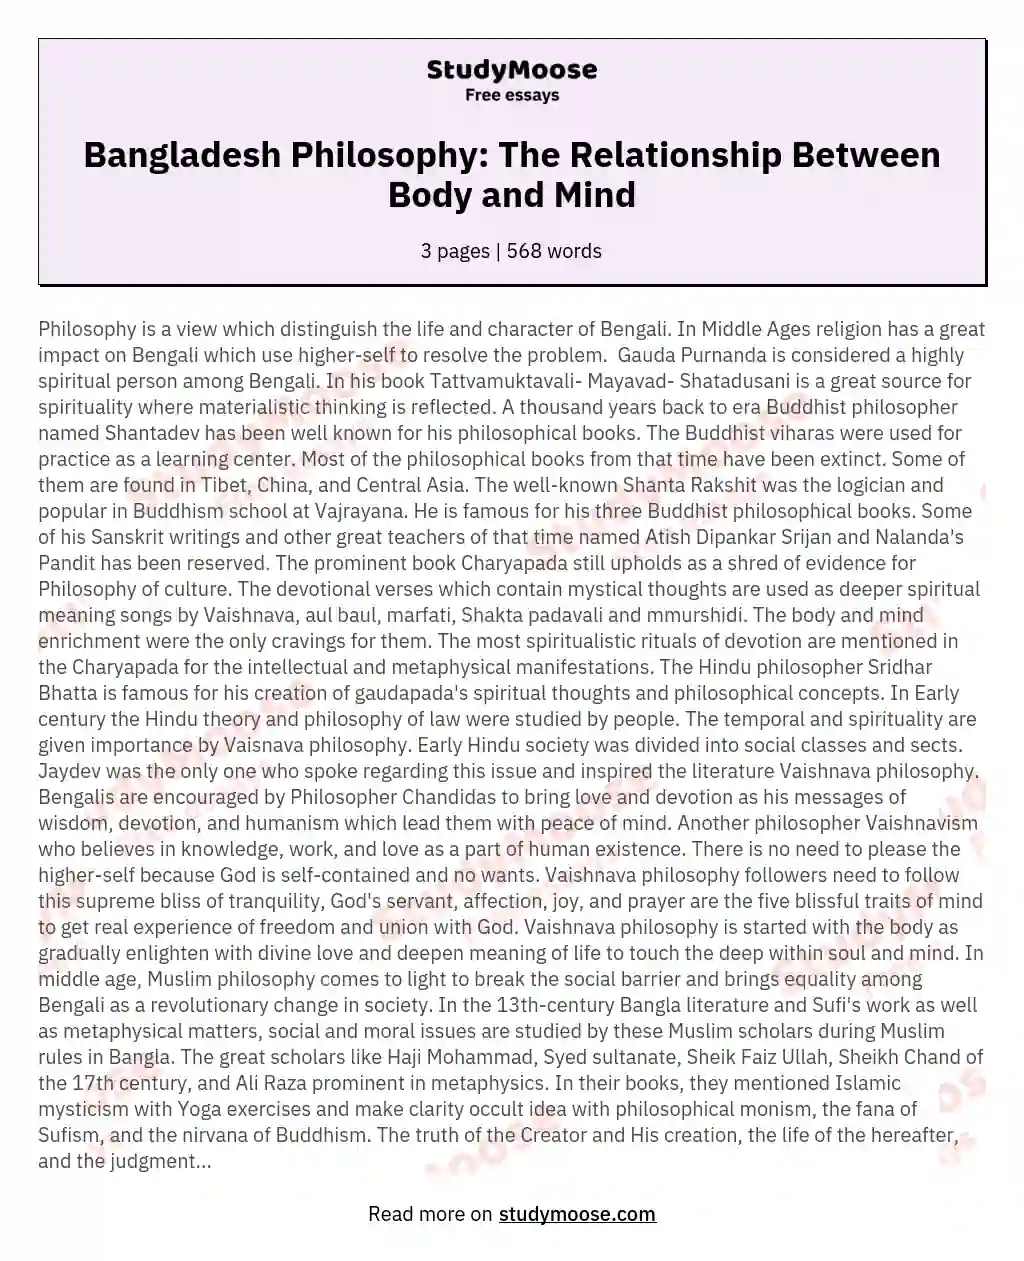 Bangladesh Philosophy: The Relationship Between Body and Mind